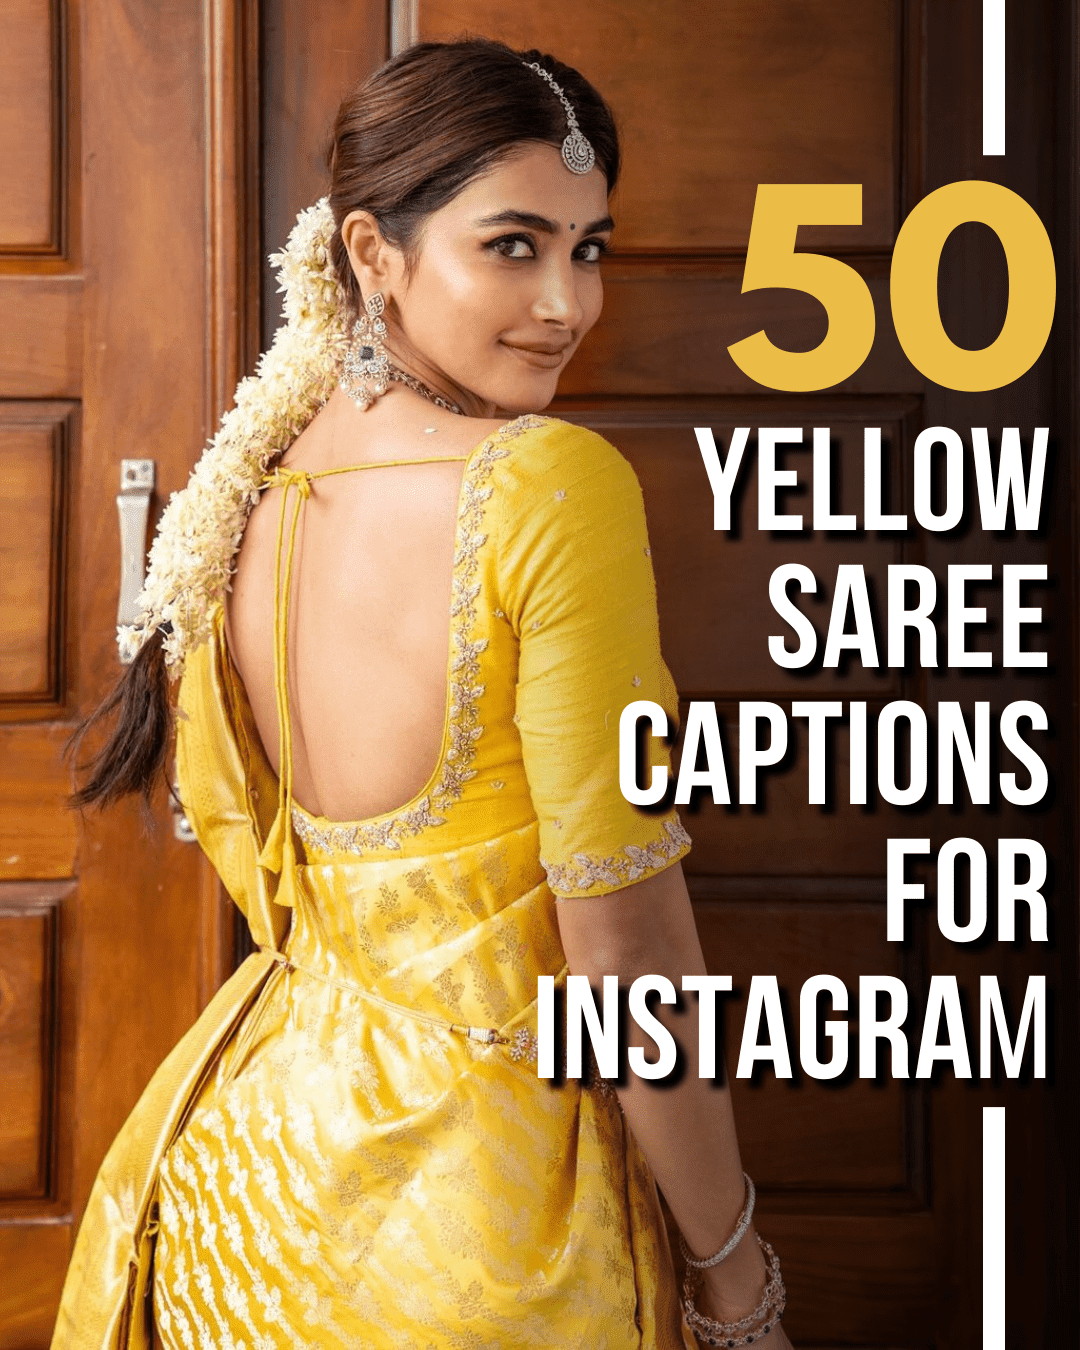 50 Yellow Saree Captions for Instagram with Emojis